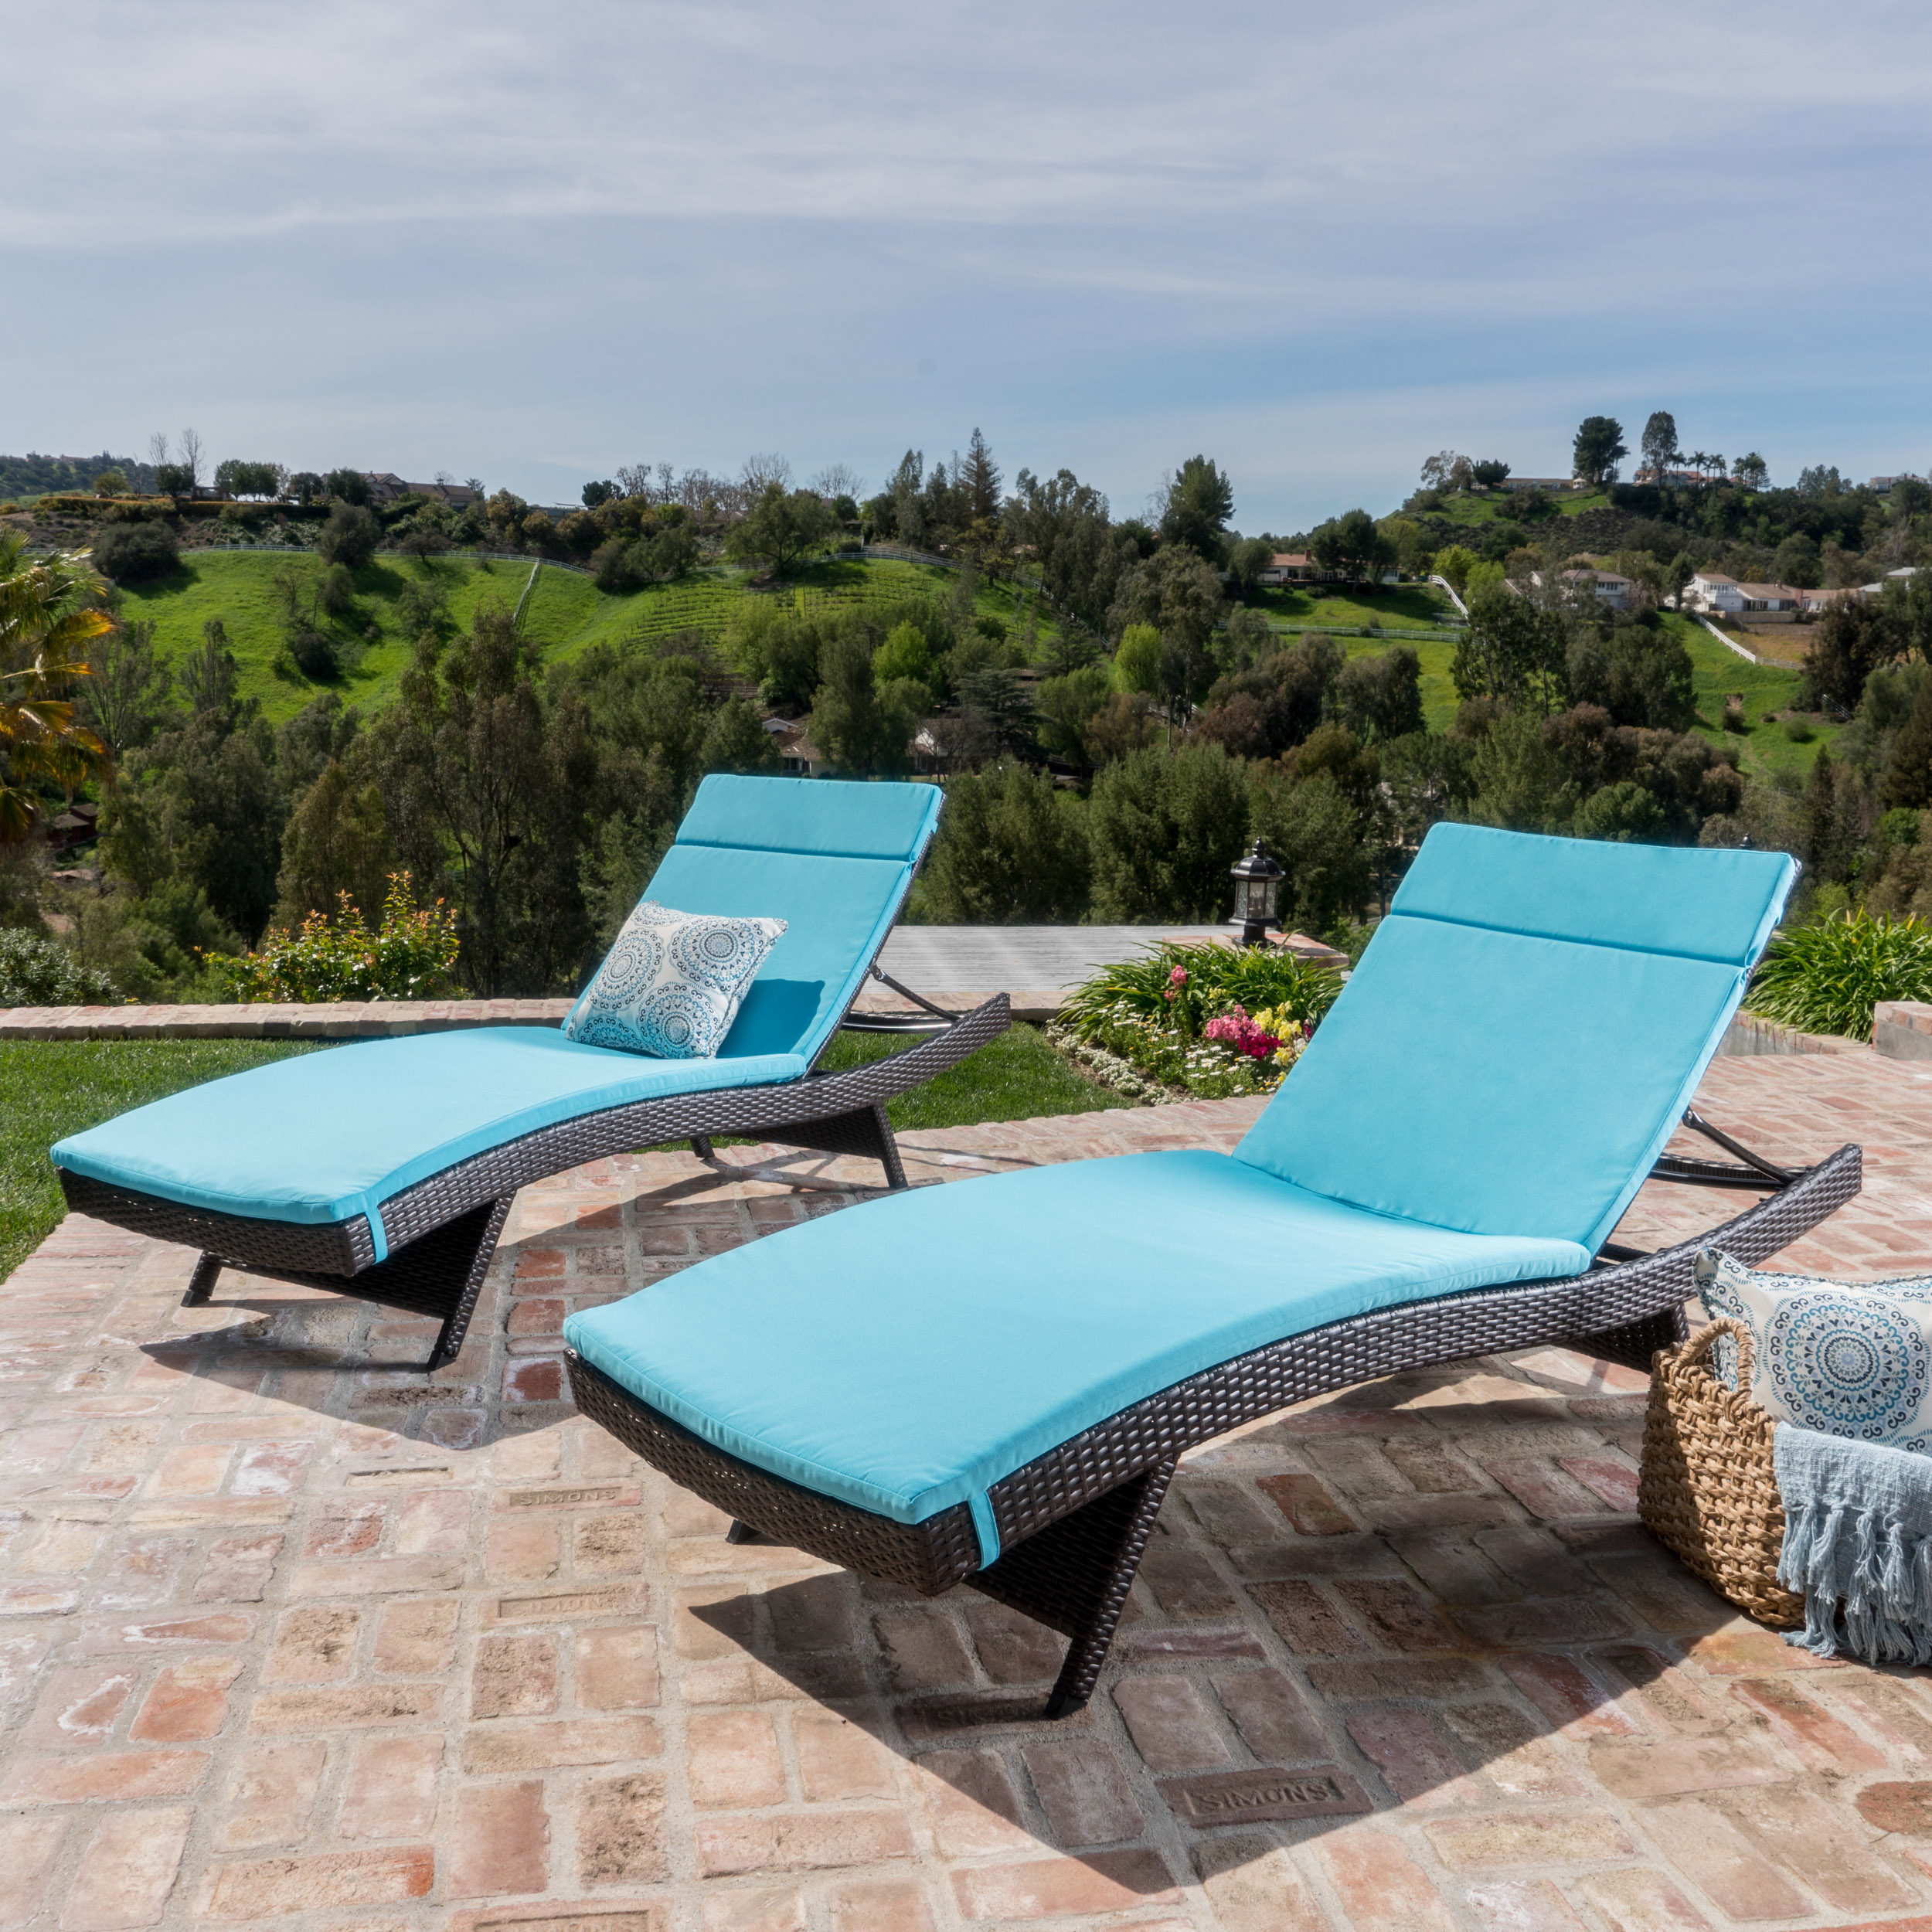 Lakeport Outdoor Adjustable Chaise Lounge Chairs With Cushions (set Of 2) - Blue Cushion